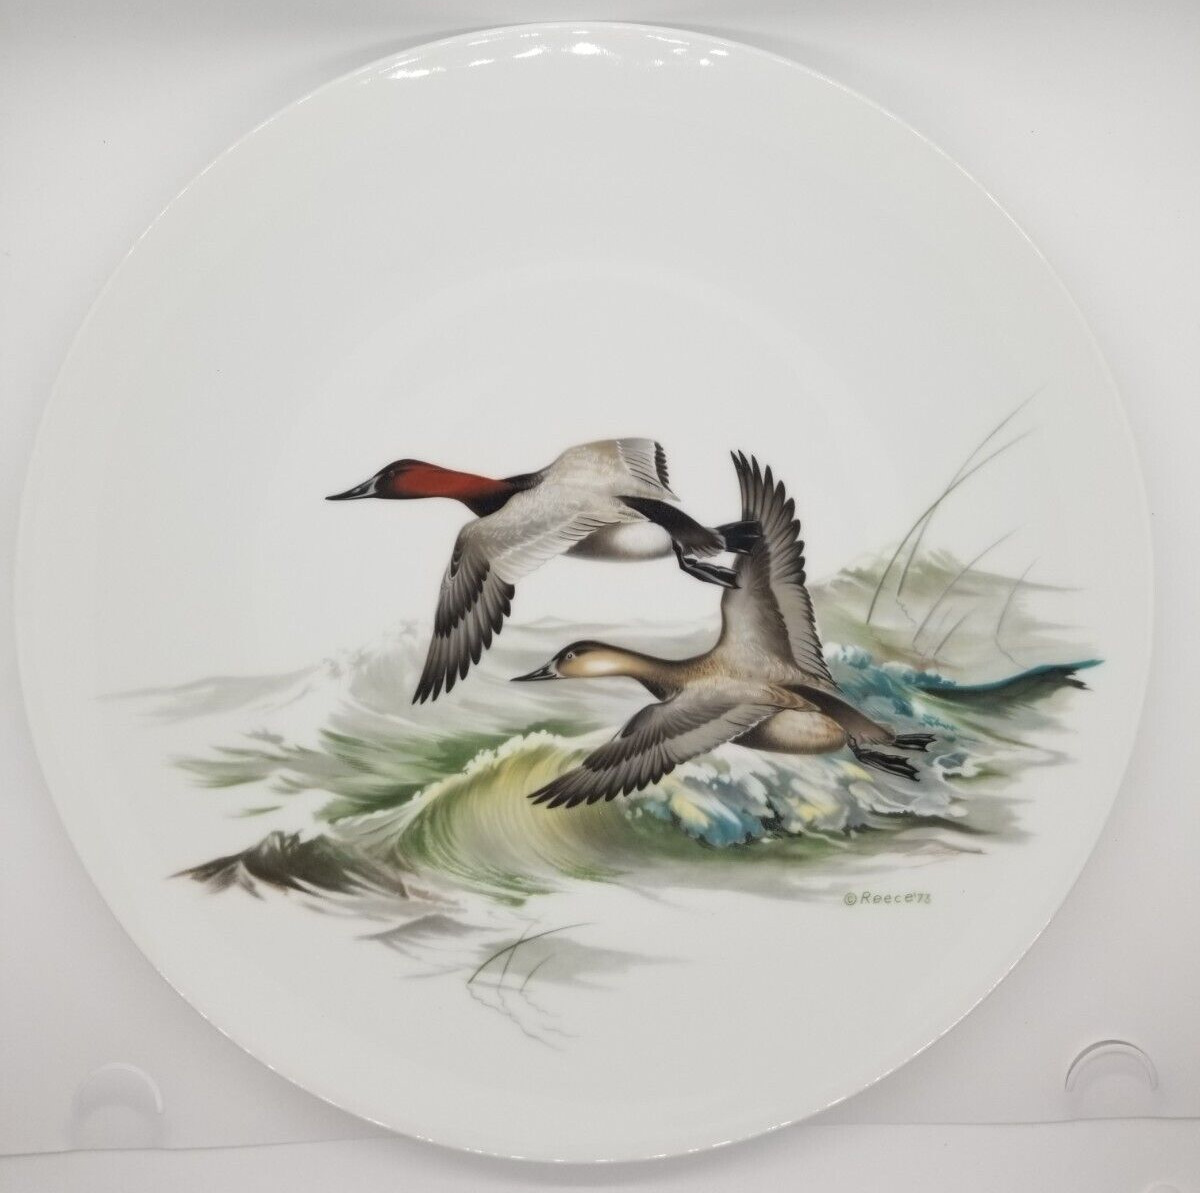 LIMOGES Maynard Reece Canvasback Bird Art Collector Plate Heavy Numbered 12\